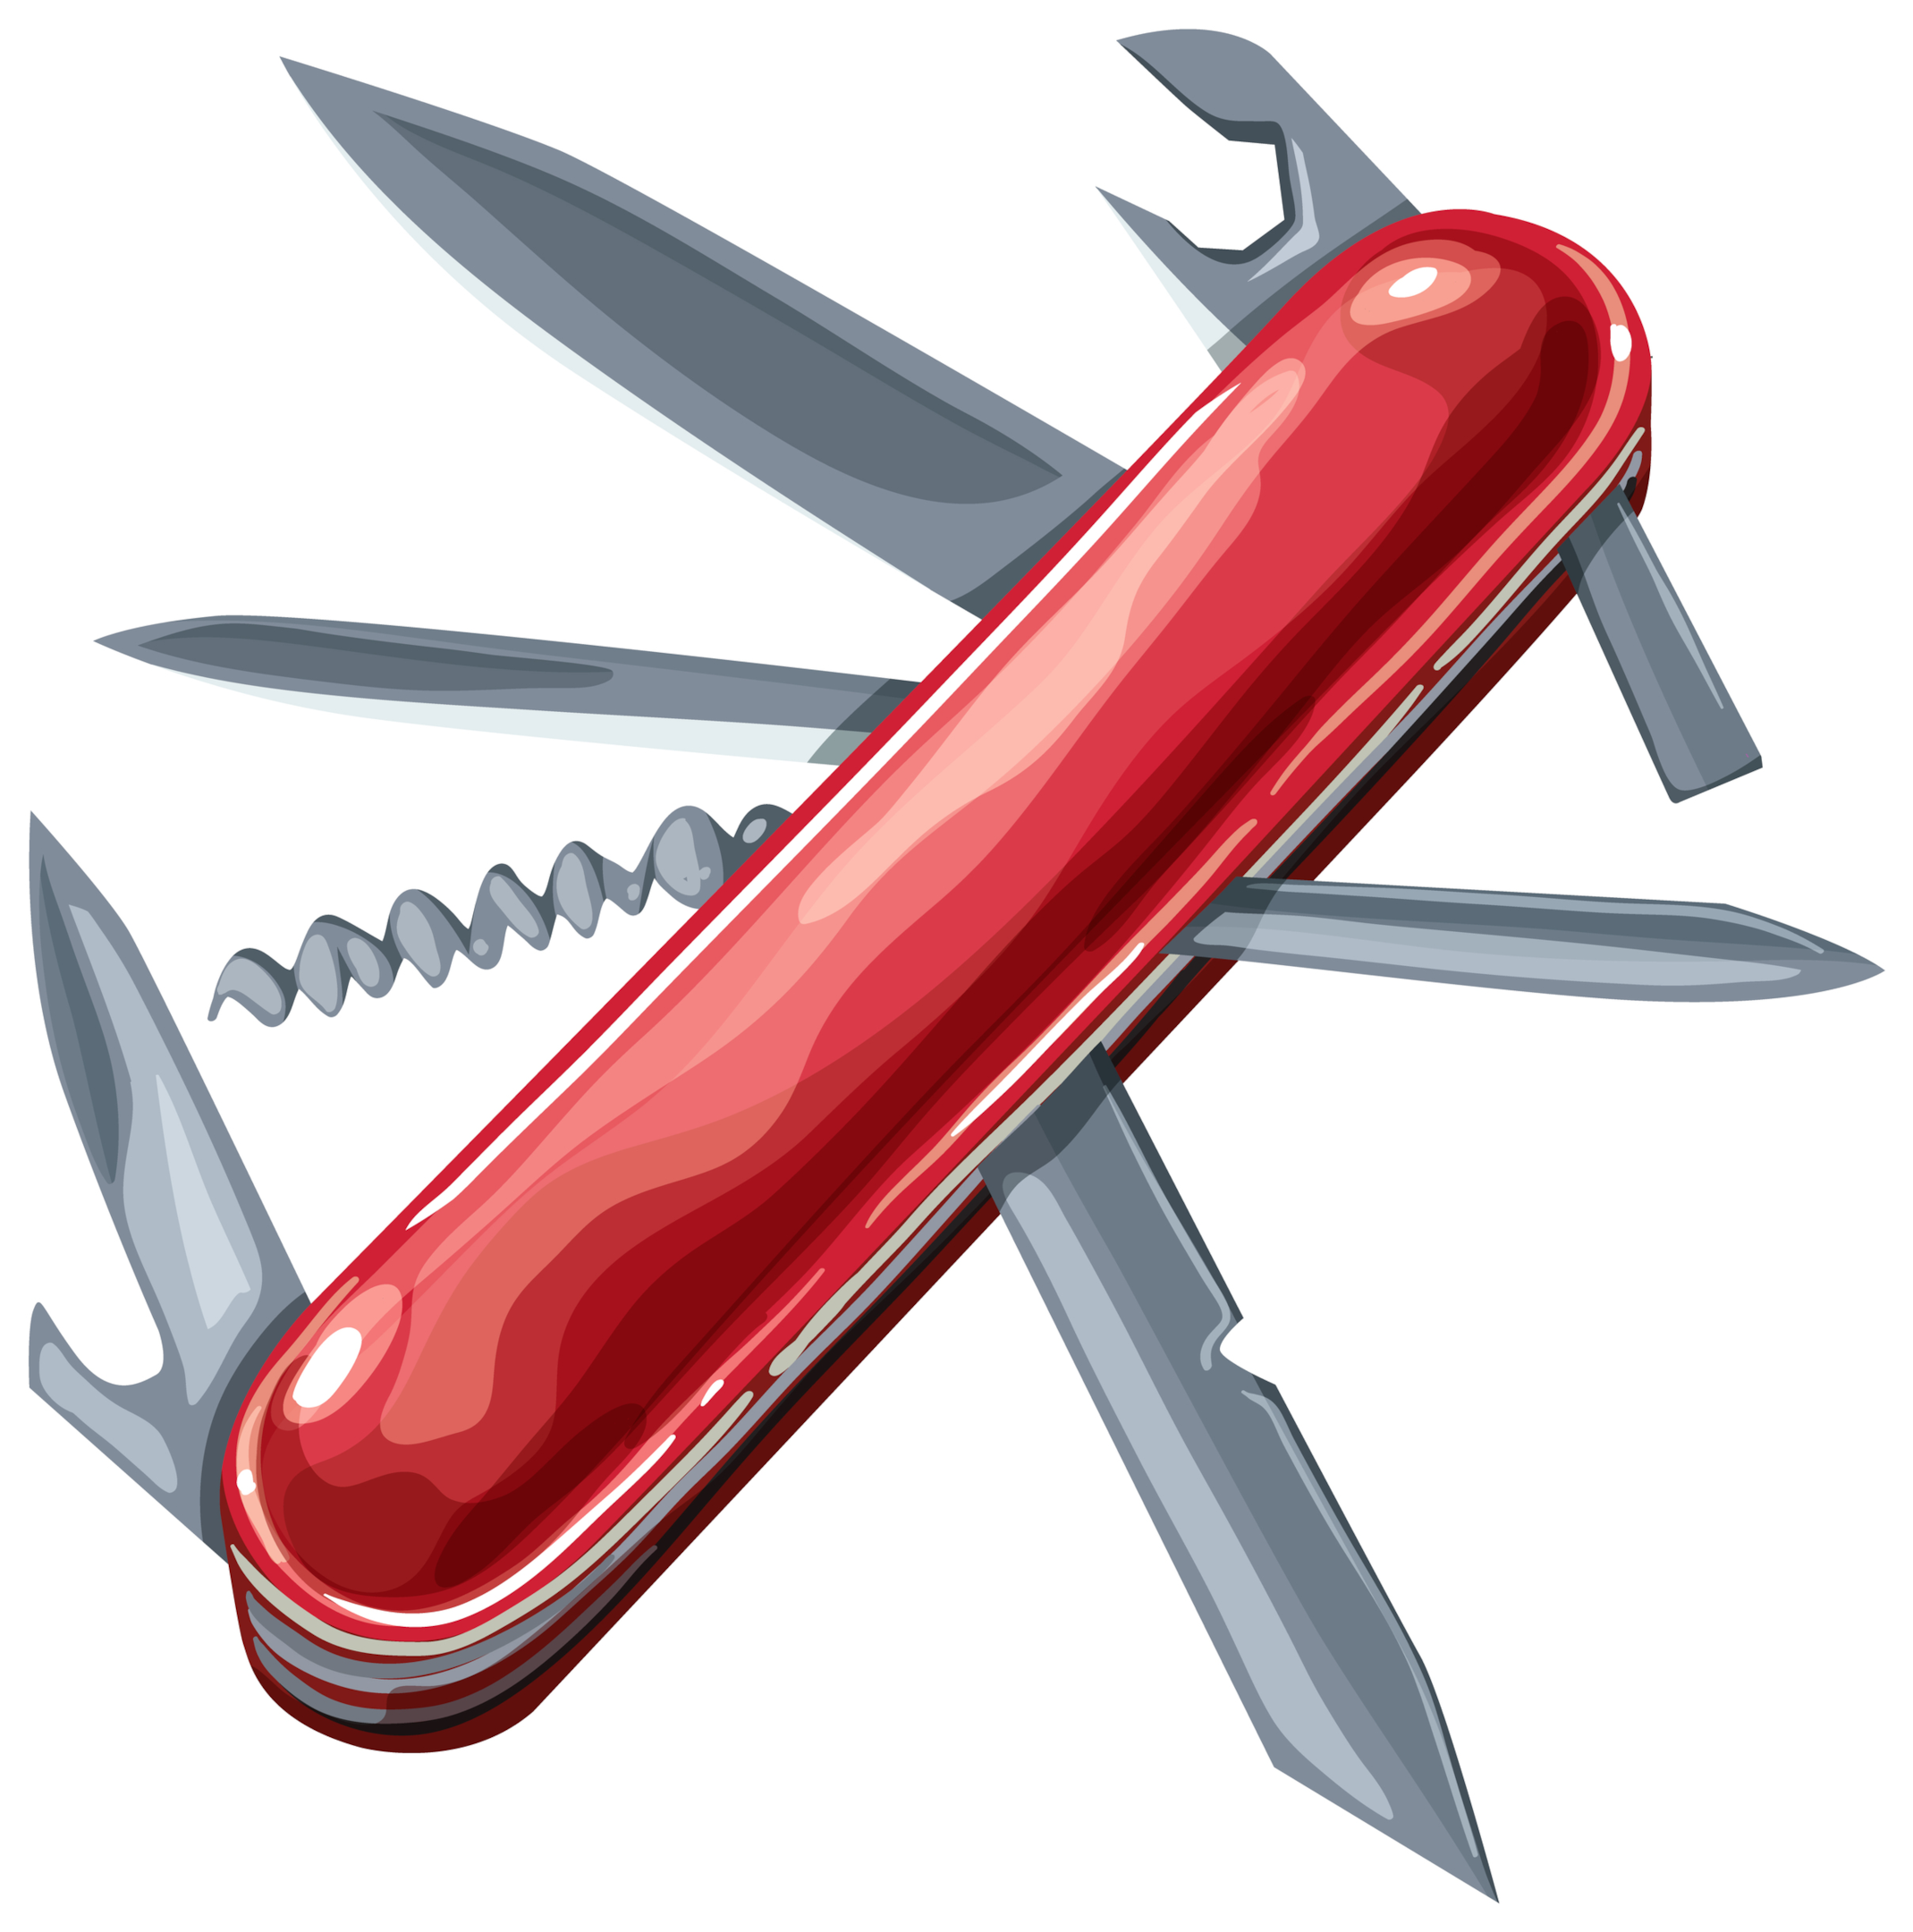 Swiss Army Knife First Aid and Safety Items for Car Emergency Kit - Essential Gear for Road Safety